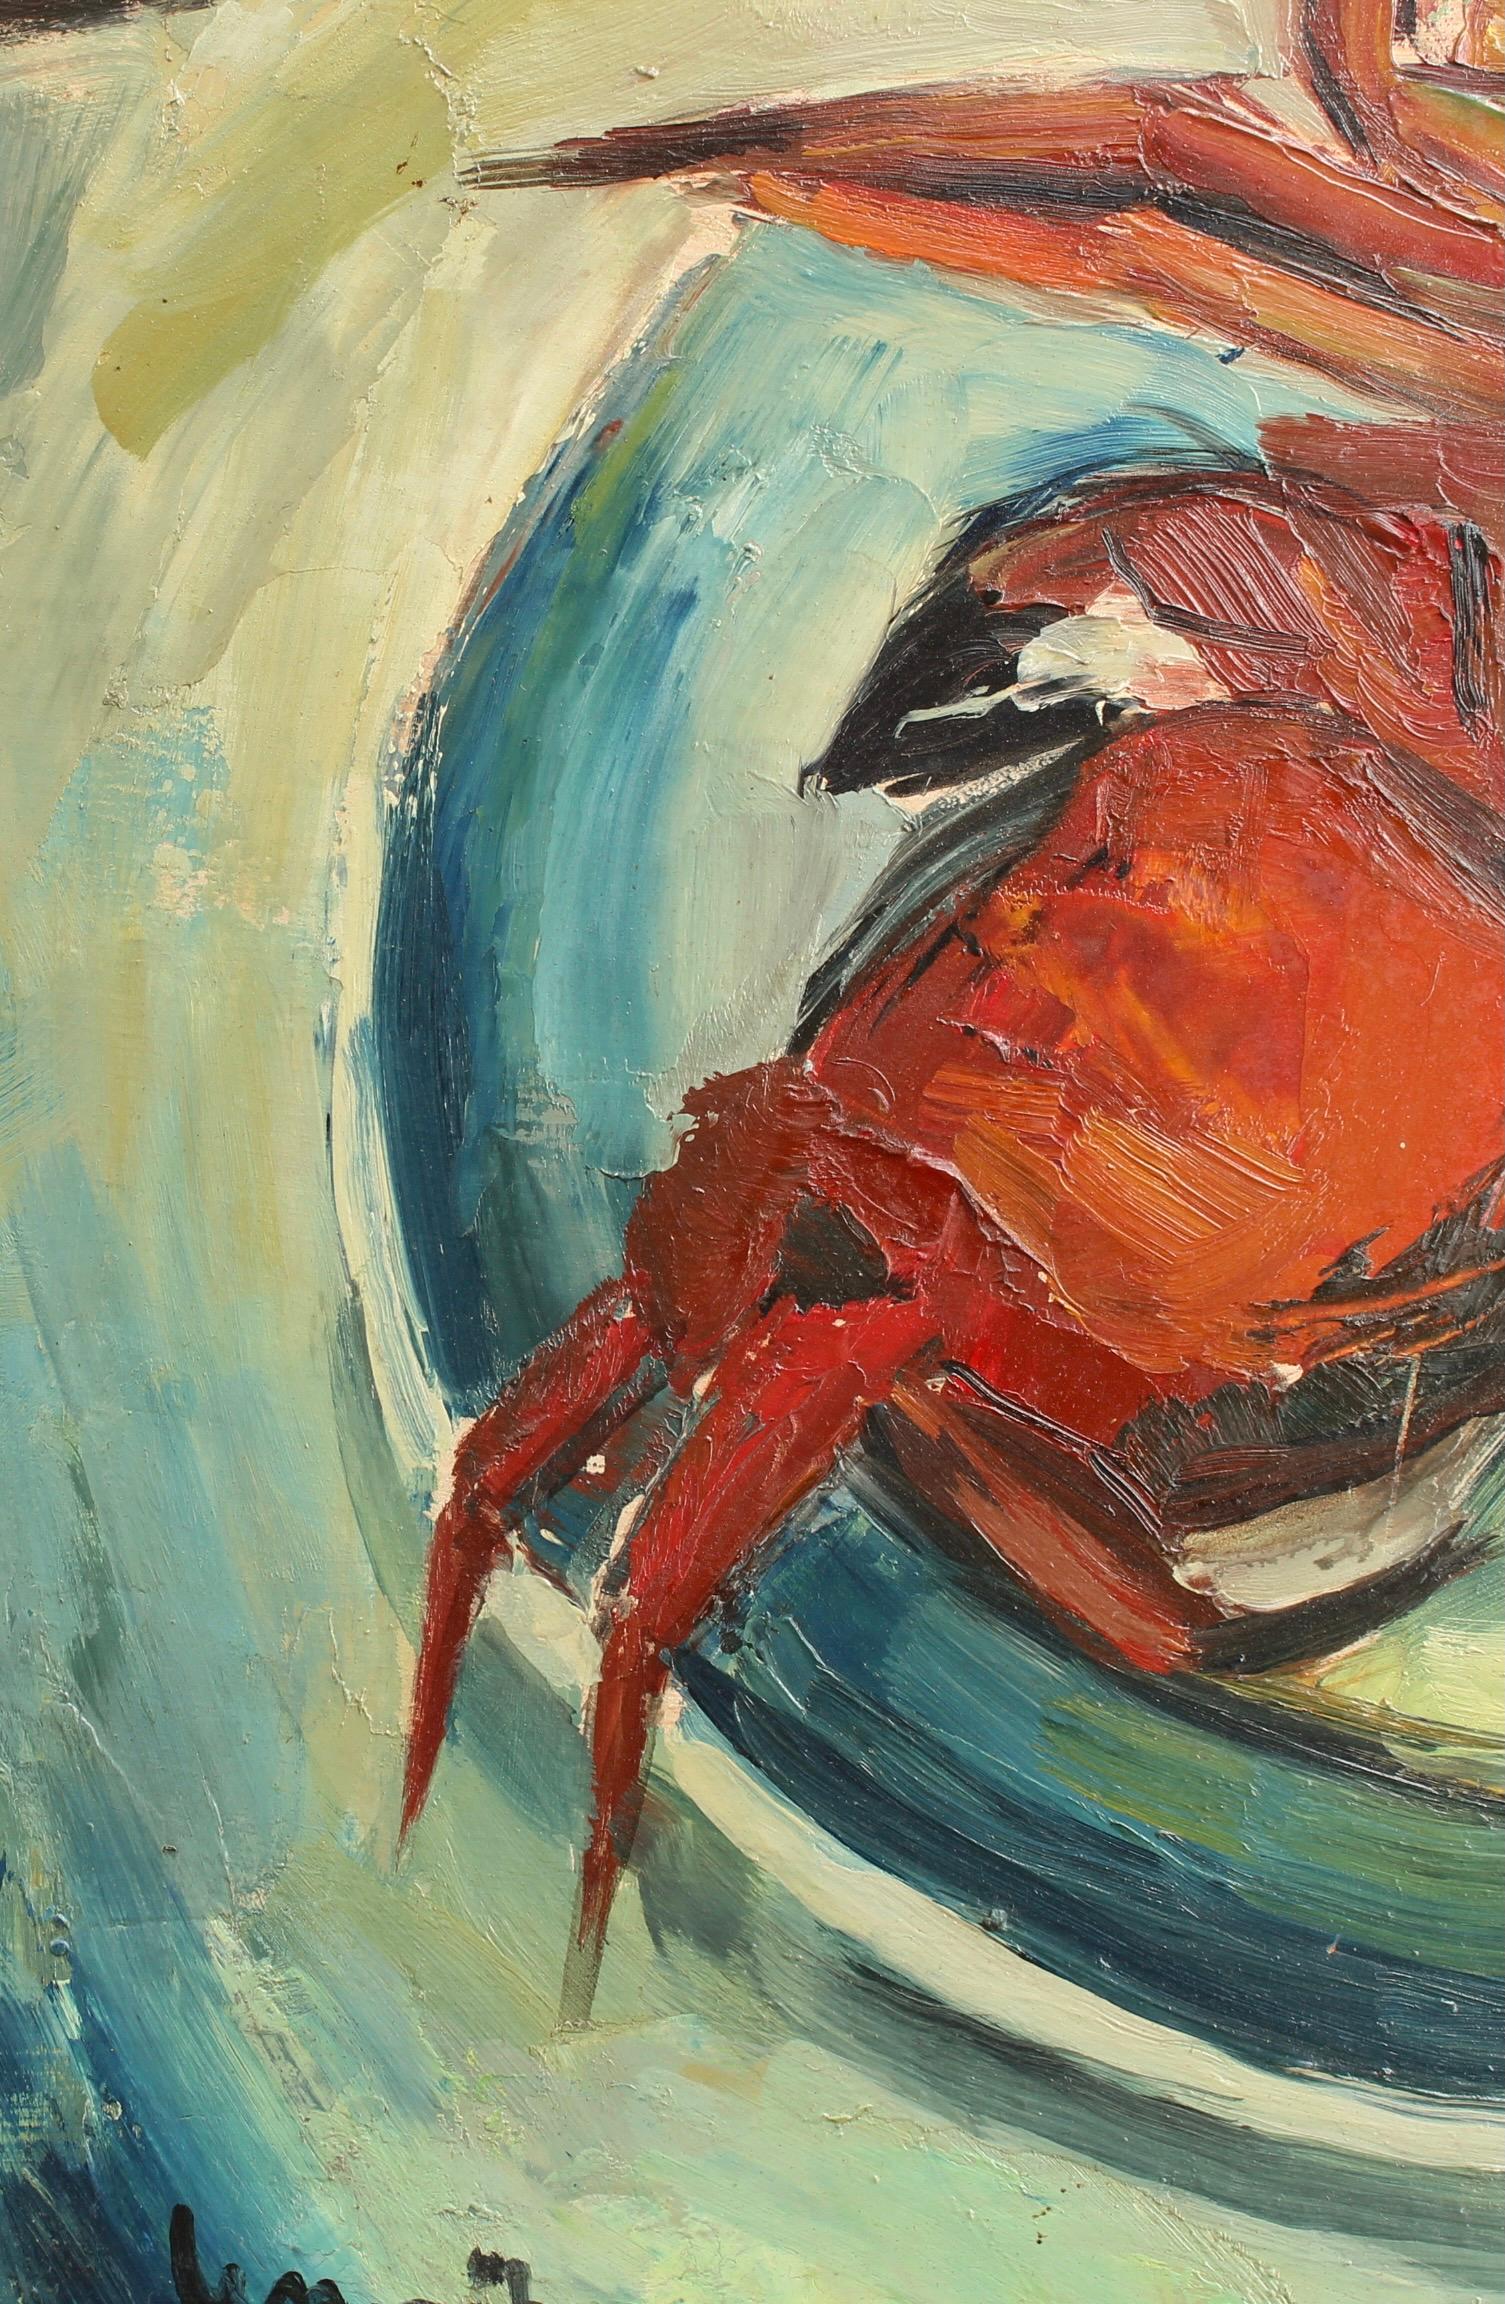 'Still Life with Crab', oil on board, by André Lemaître (1951). As an artist based in Northern France's Normandy, Lemaître painted many works in the countryside, still lifes such as this one, as well as portraits. In Normandy, overlooking the Mont